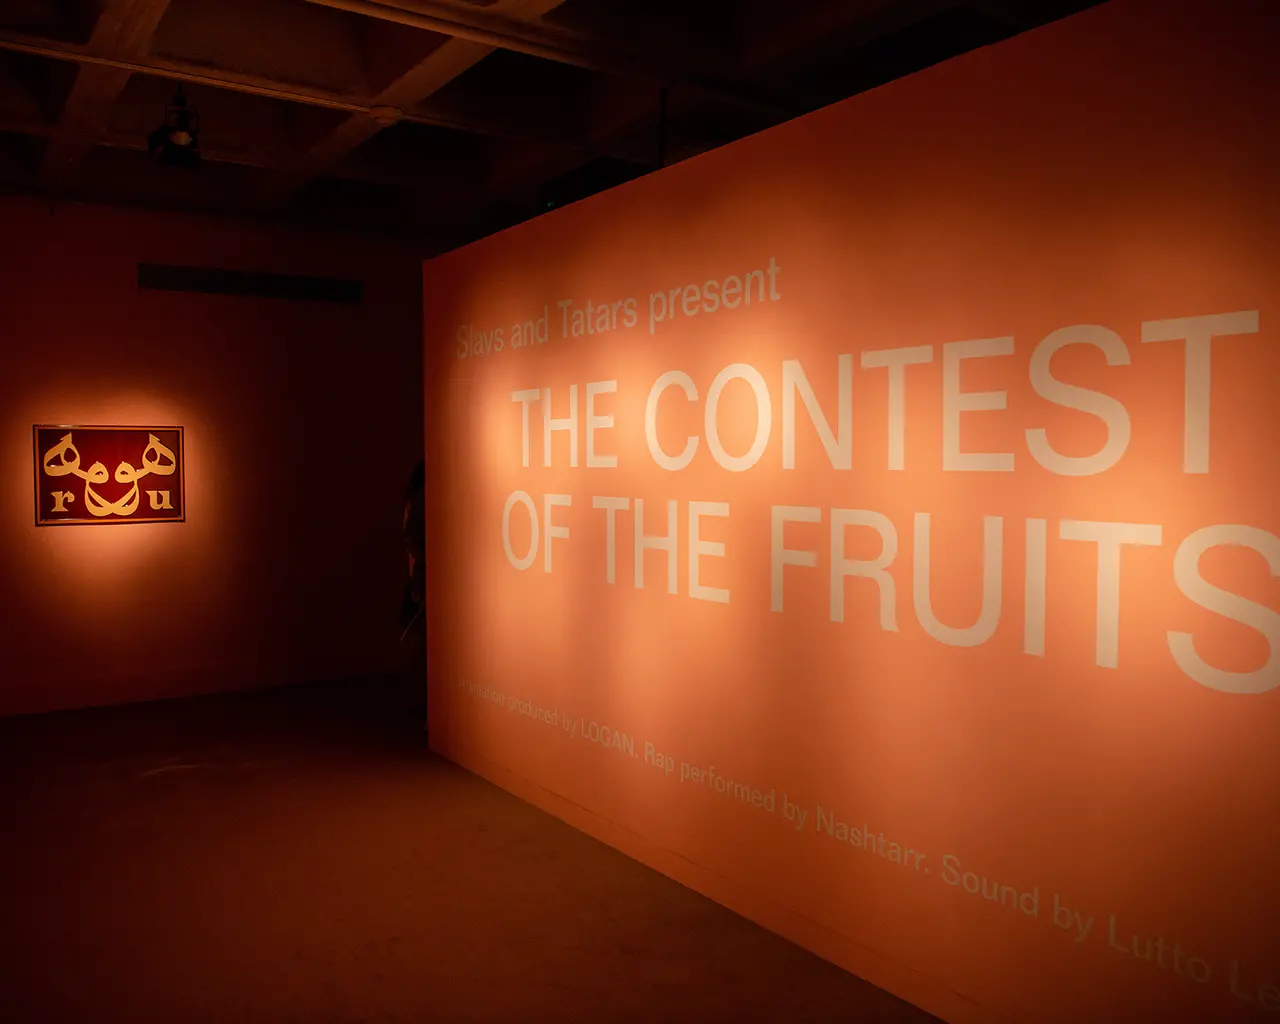 Slavs and Tatars, The Contest of the Fruits exhibition, 2021, Cantor Fitzgerald Gallery. Photo by Holden Blanco, courtesy of Hurford Center for the Arts and Humanities.